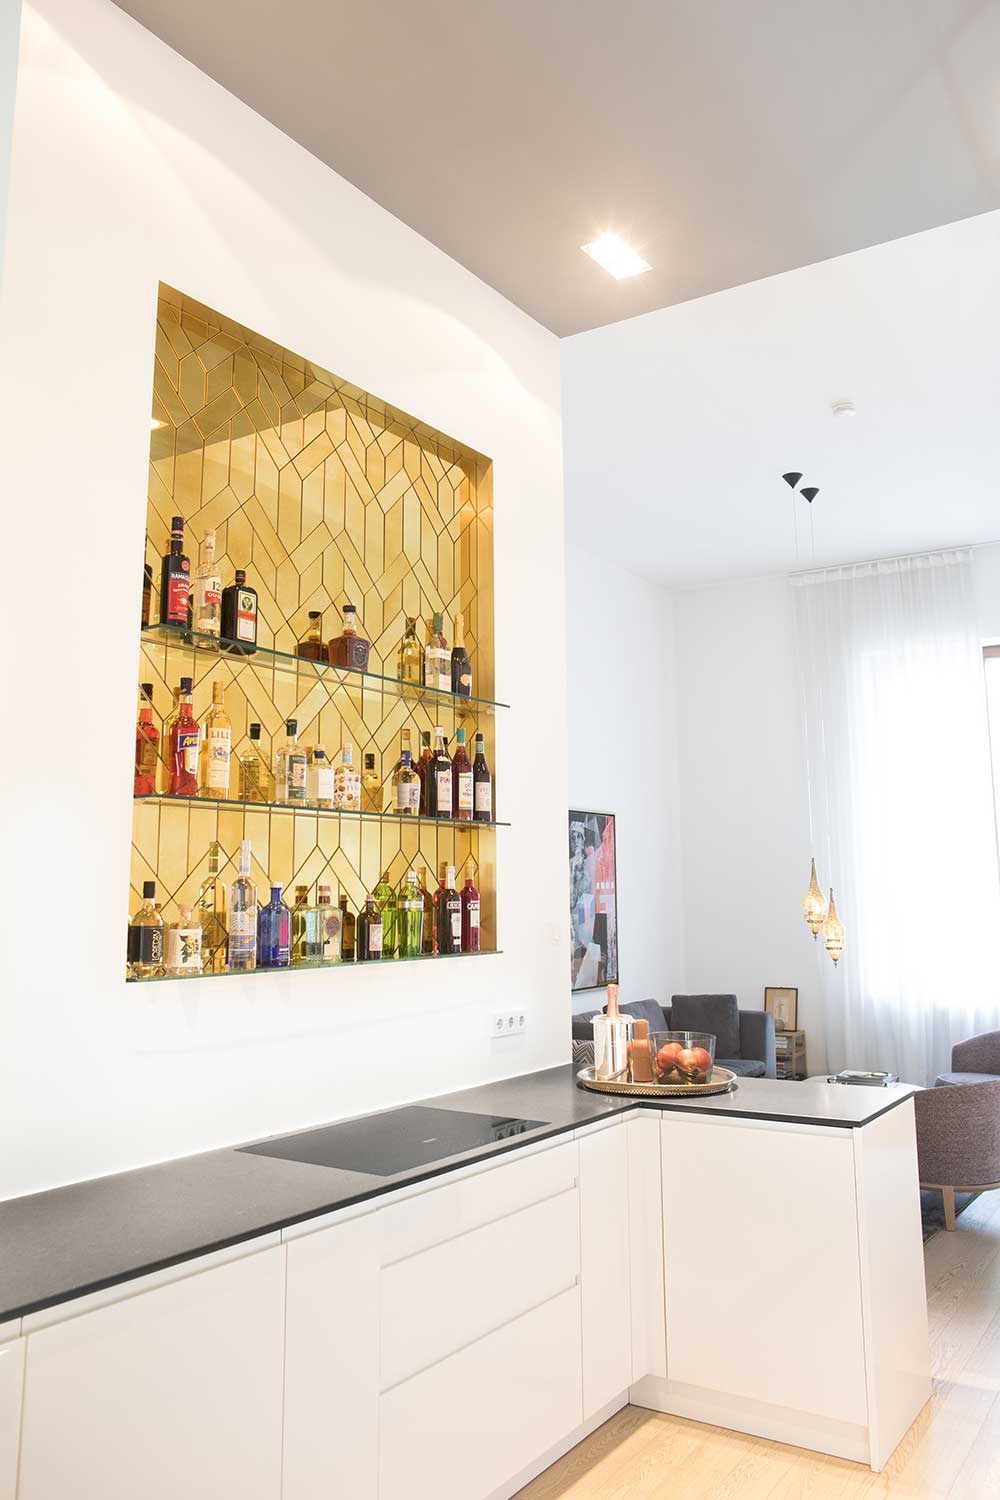 An exclusive modern bar with 3 shelves for bottles, consisting of many faced, glued golden antique mirror parts in a brass frame, embedded in the wall.